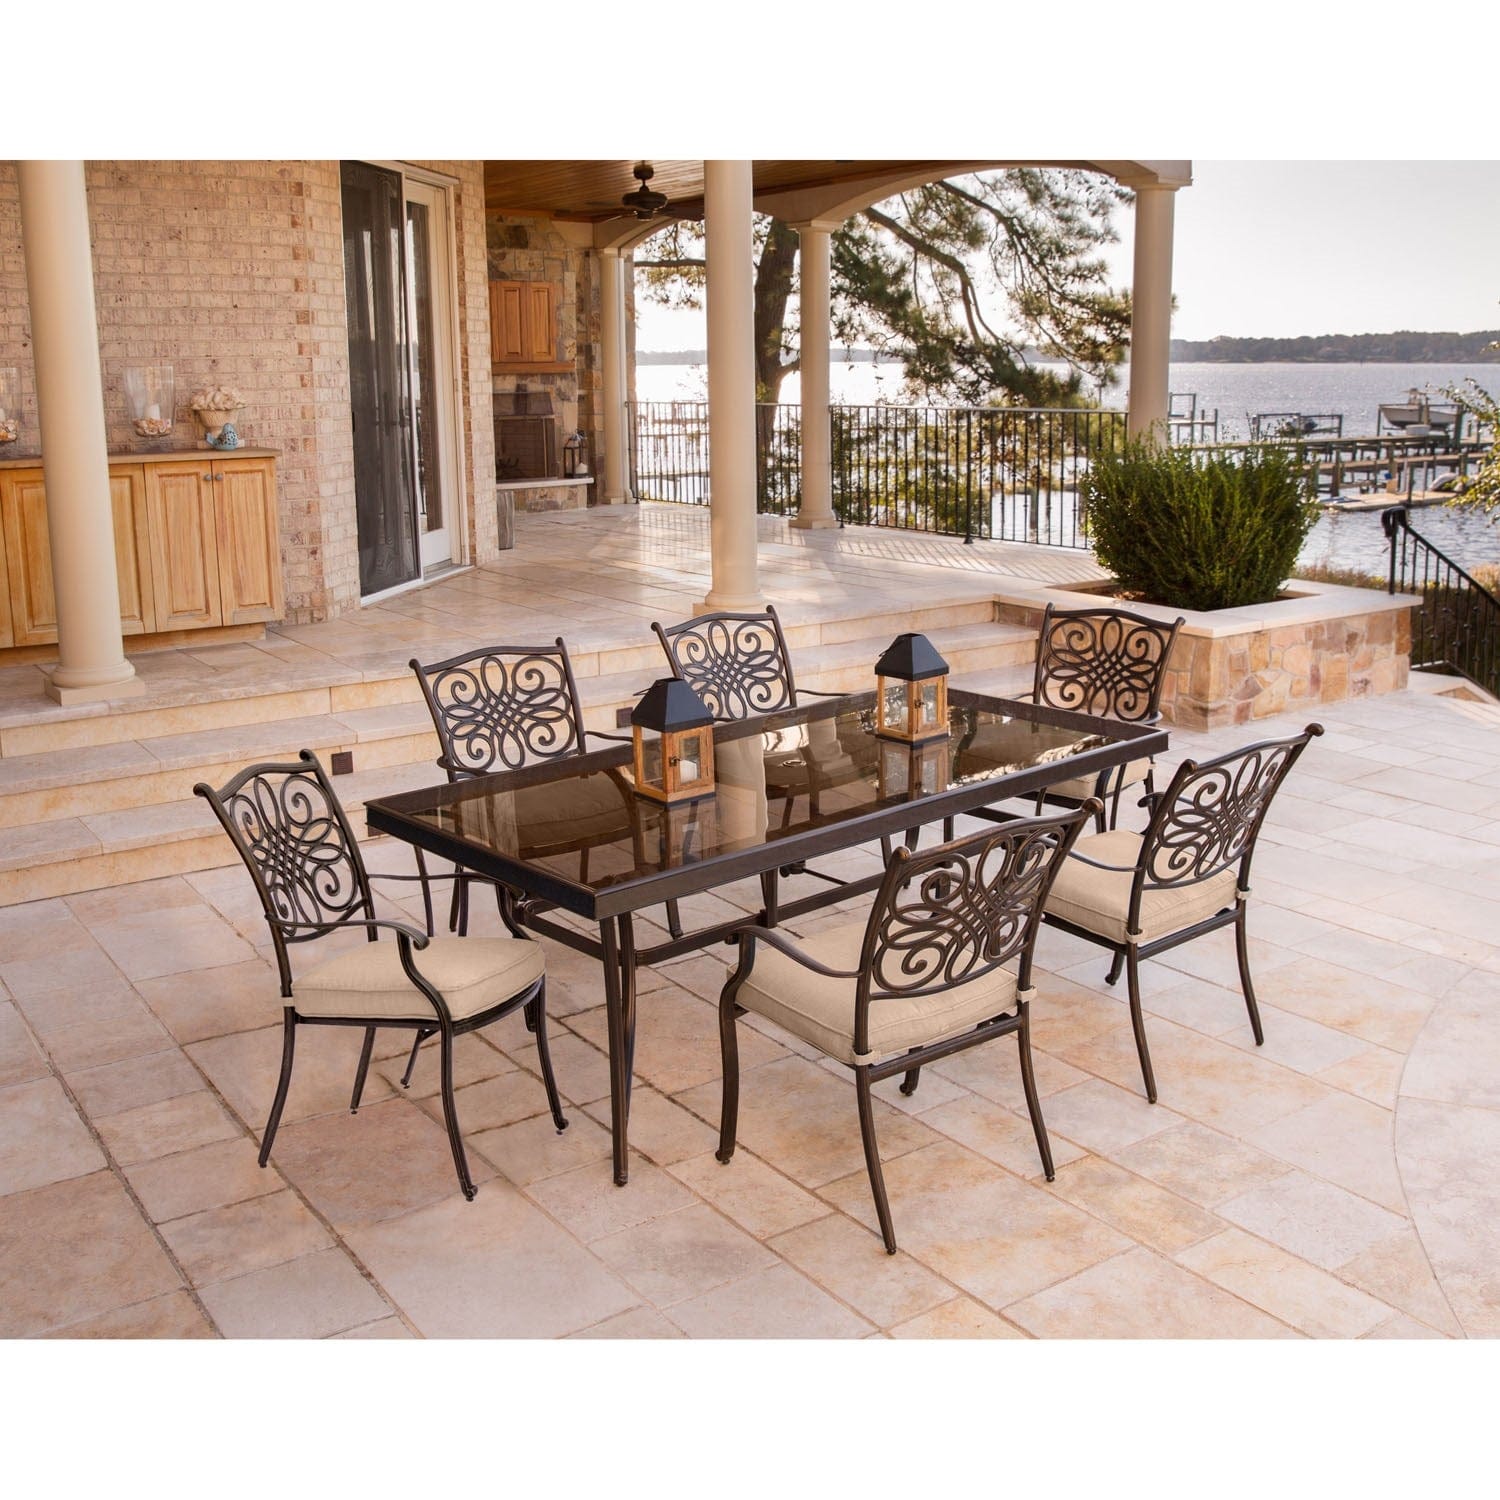 Hanover Outdoor Dining Set Hanover - Traditions 7-Piece Aluminum Frame Dining Set in Tan with Extra Large Glass-Top Dining Table | TRADDN7PCG